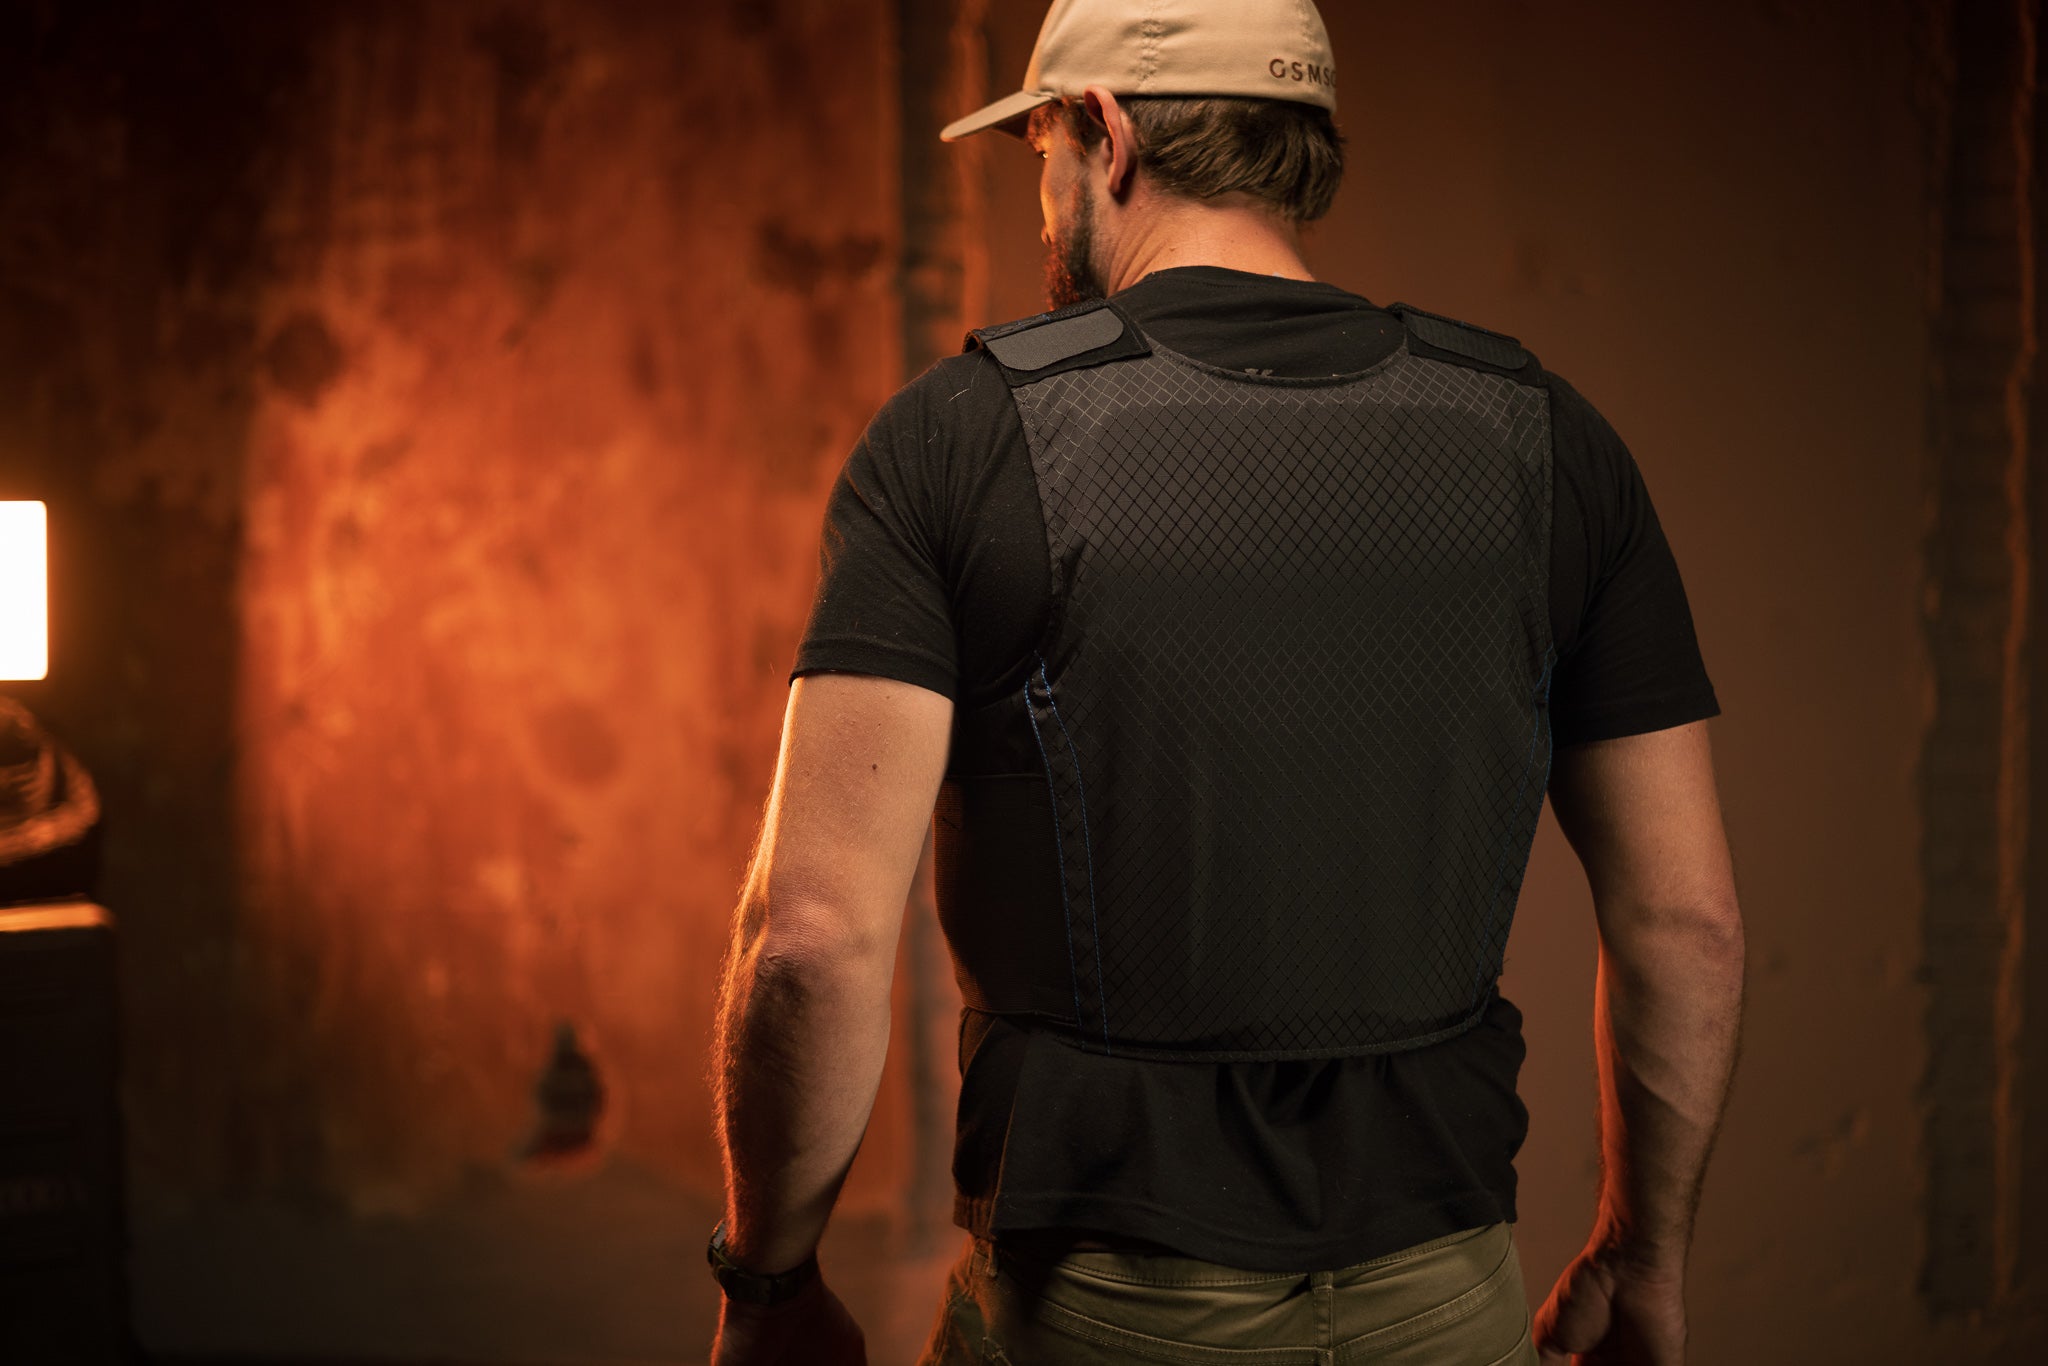 Concealable armor vest offers both chest and back protection of the most vital organs